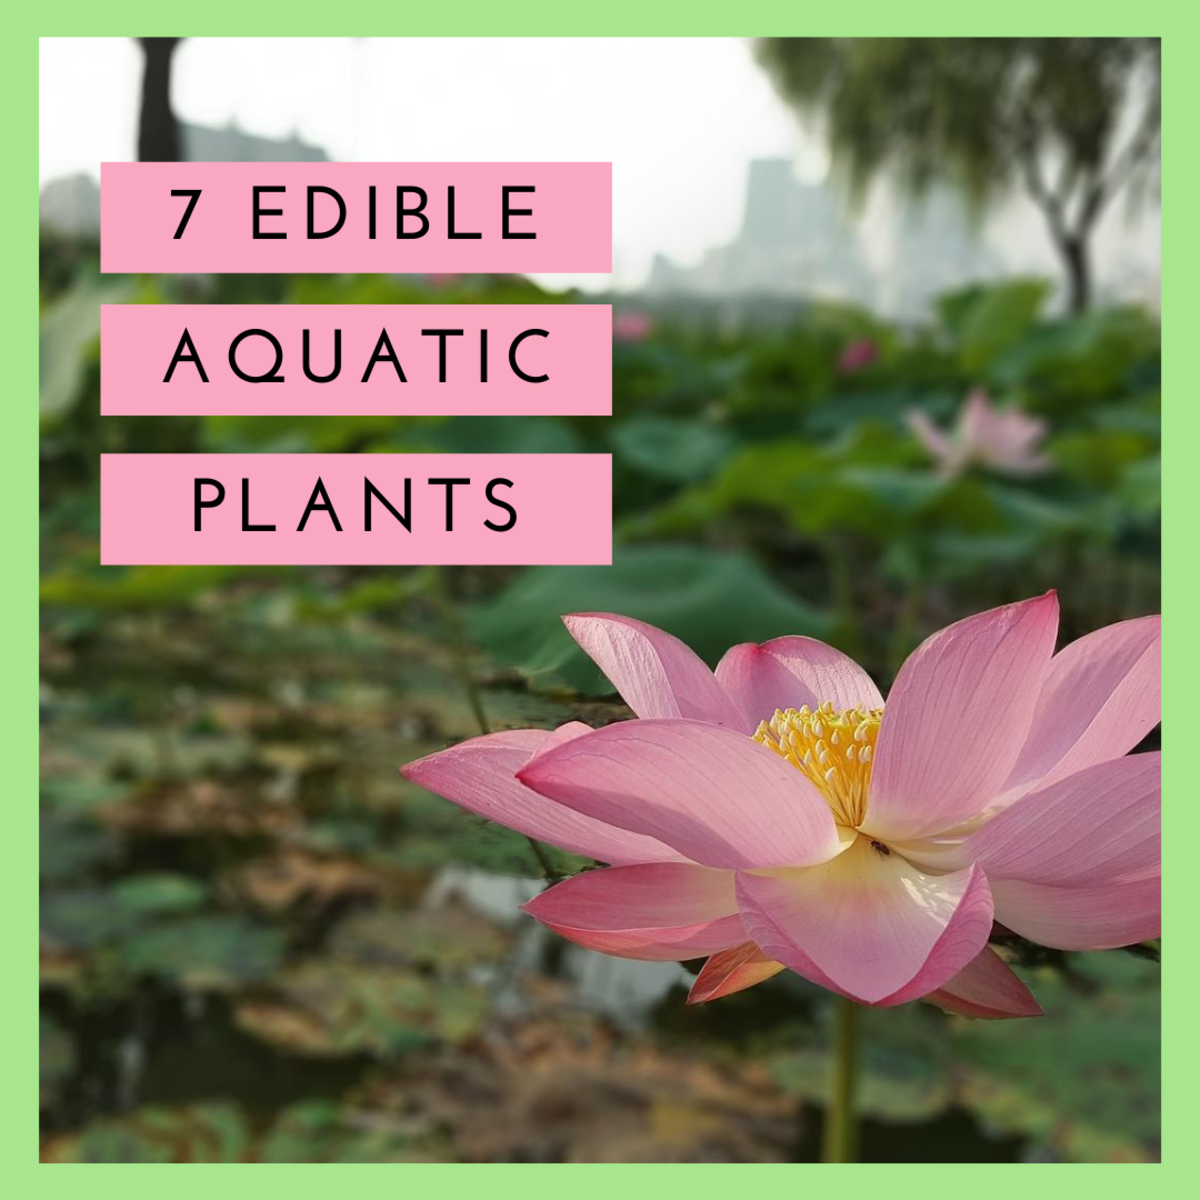 This article will provide a list of delicious edible aquatic plants to grow in your pond or backyard water feature.